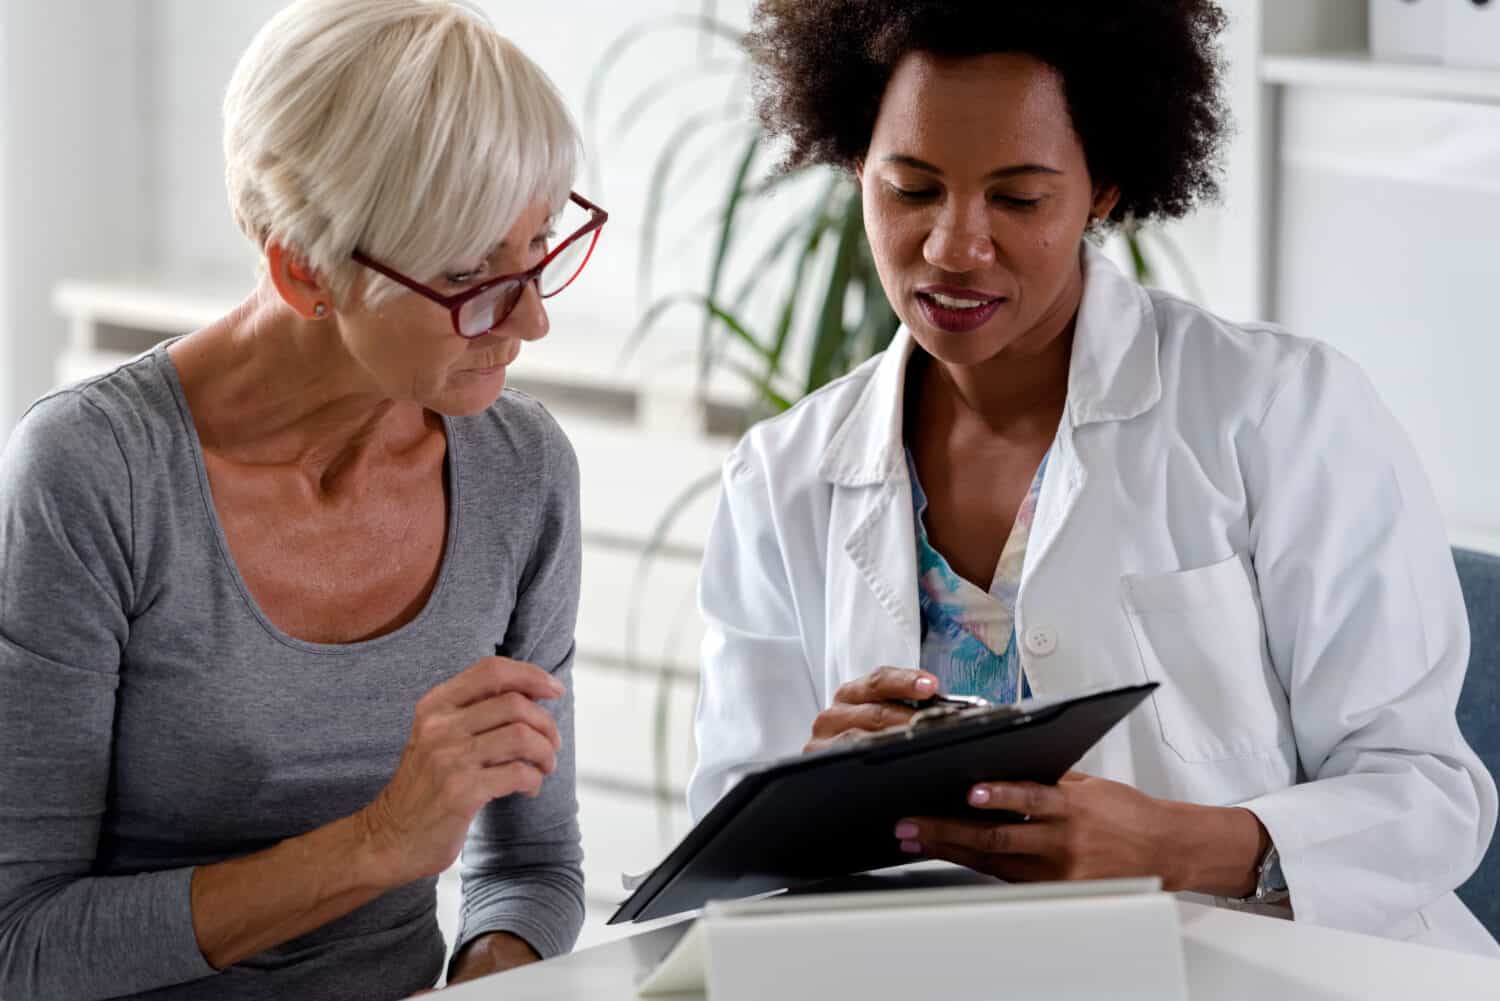 A female health practitioner and hearing aid expert sits at a table with a patient to discuss hearing loss, the best free online hearing test and a hearing aid price.